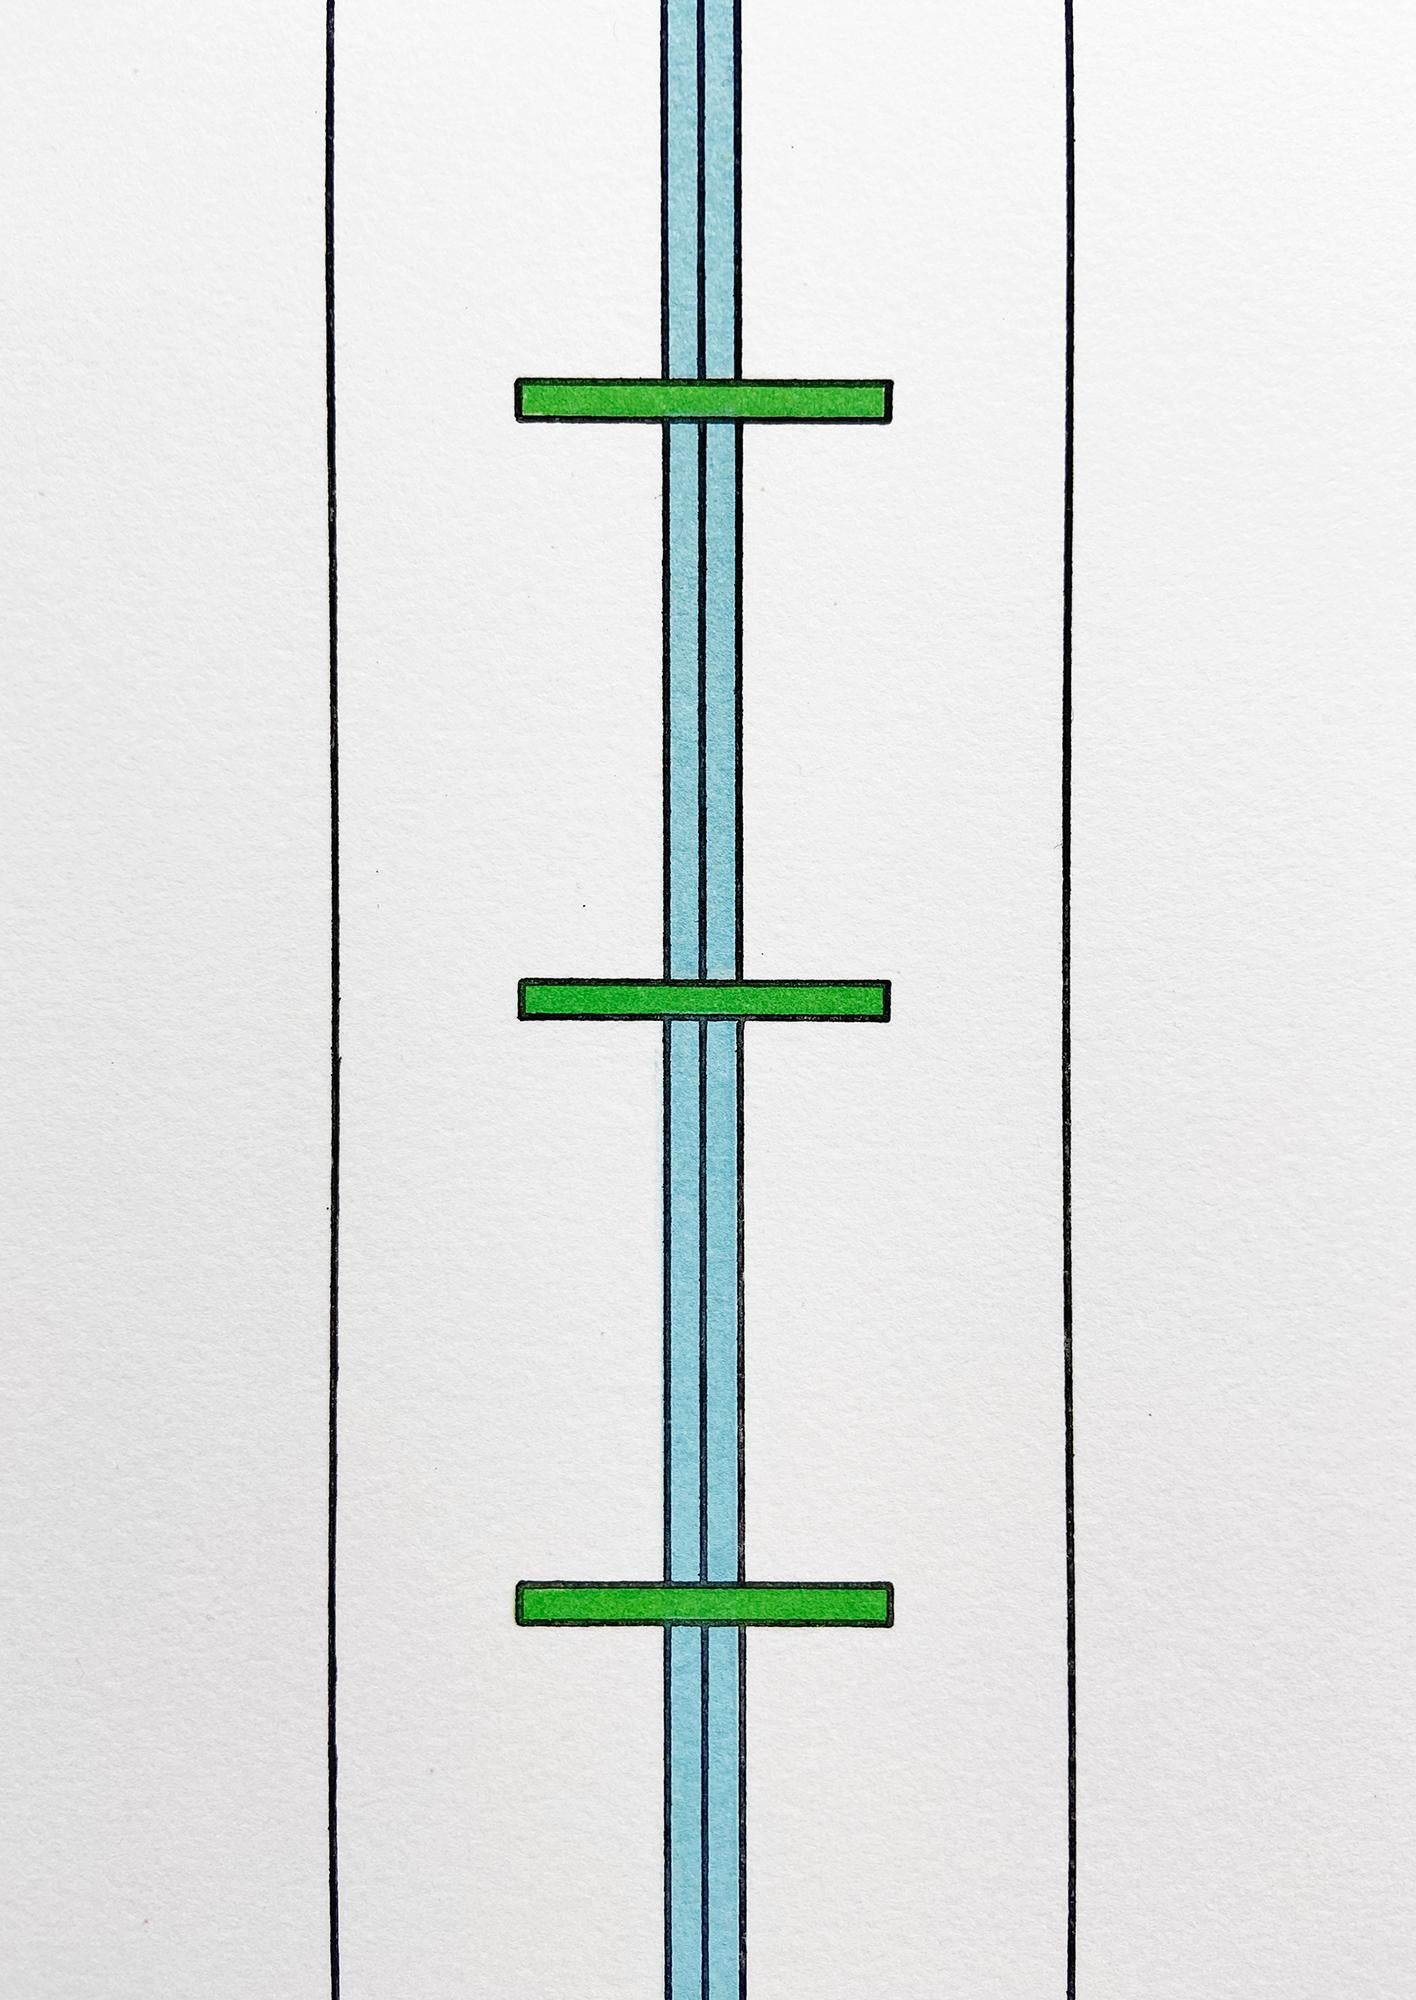 Untitled (Sheet 10 from Projects 1963-1995), Minimalism, Abstract Art - Print by Dan Flavin